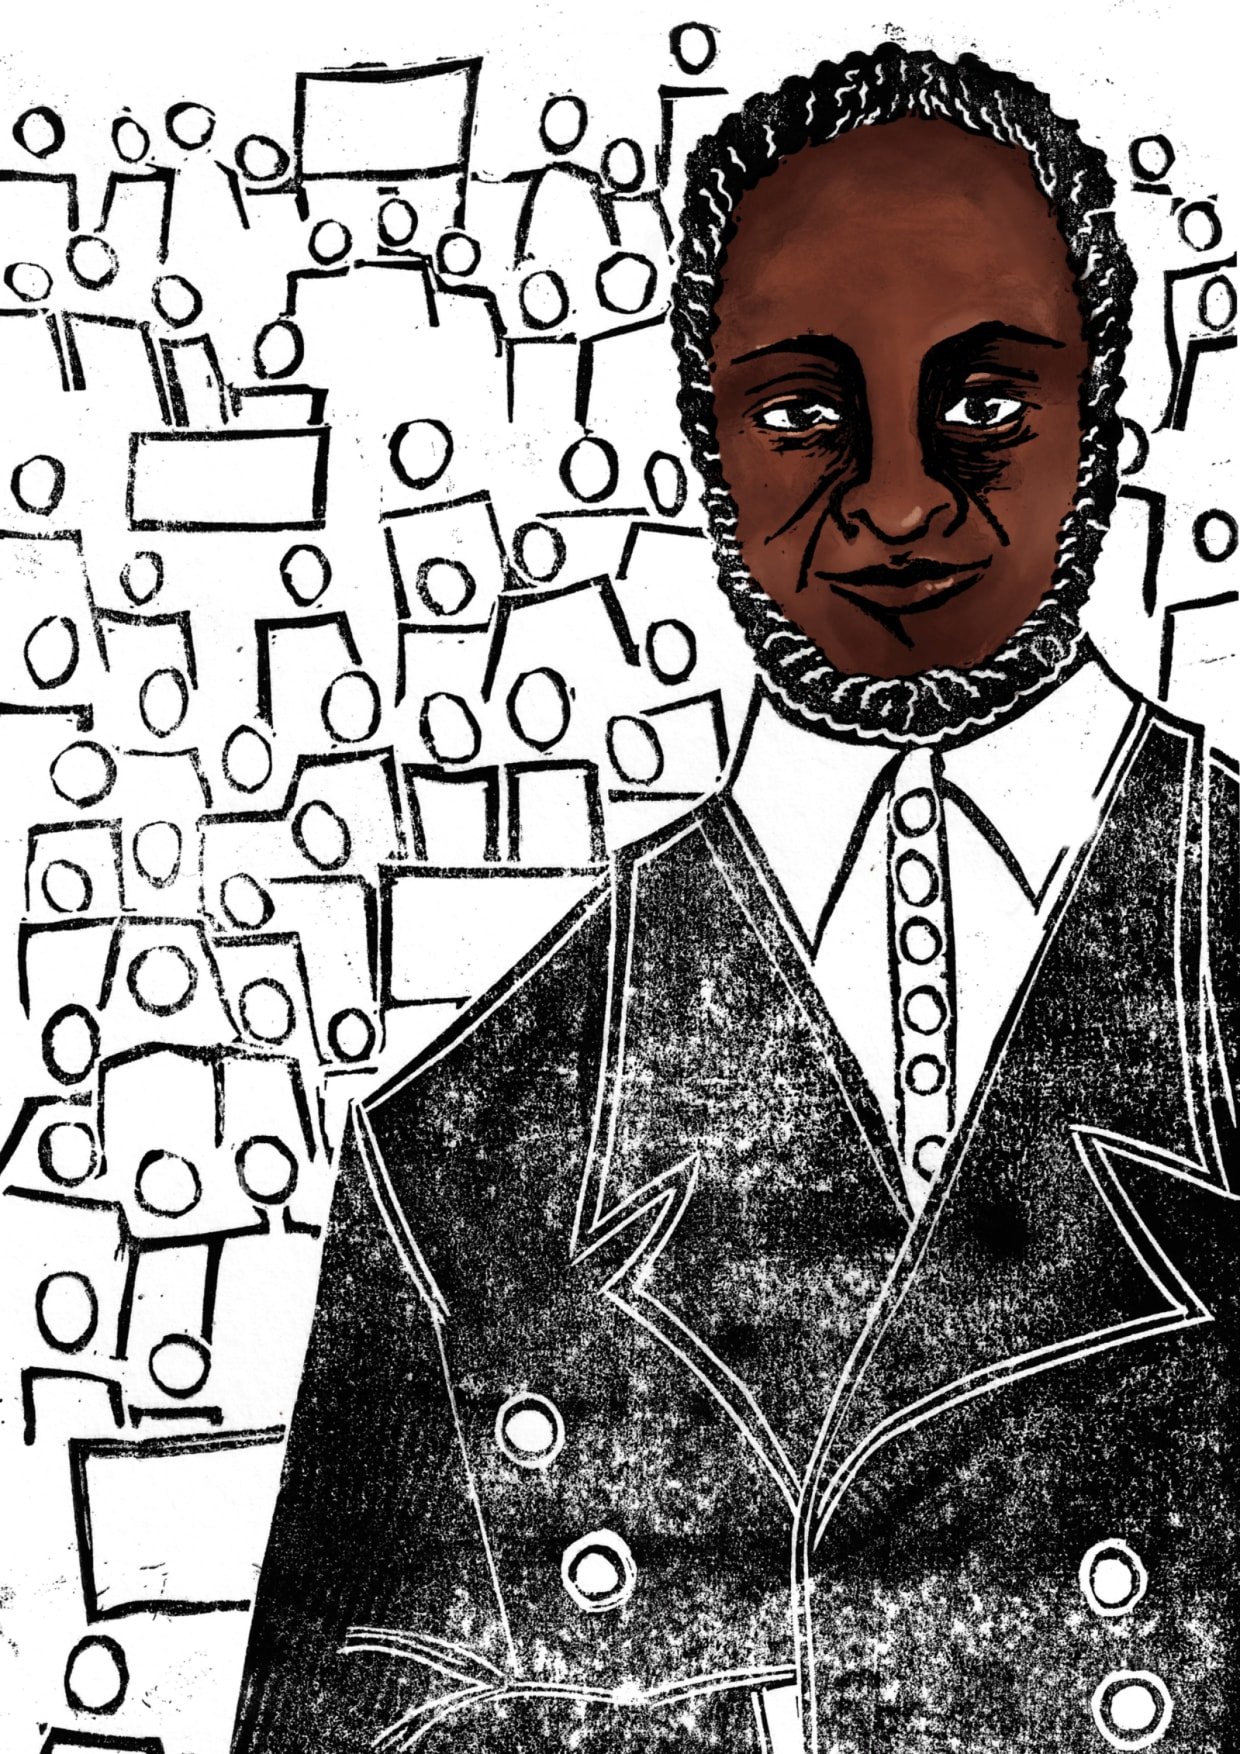 Lino print artwork. A tall Black man wearing a double-breasted black coat on top of a white collared shirt and thin tie looks straight forward. He has short hair and a beard. Behind him are the outlines of many protestors, holding up signs, depicted in abstract lines.